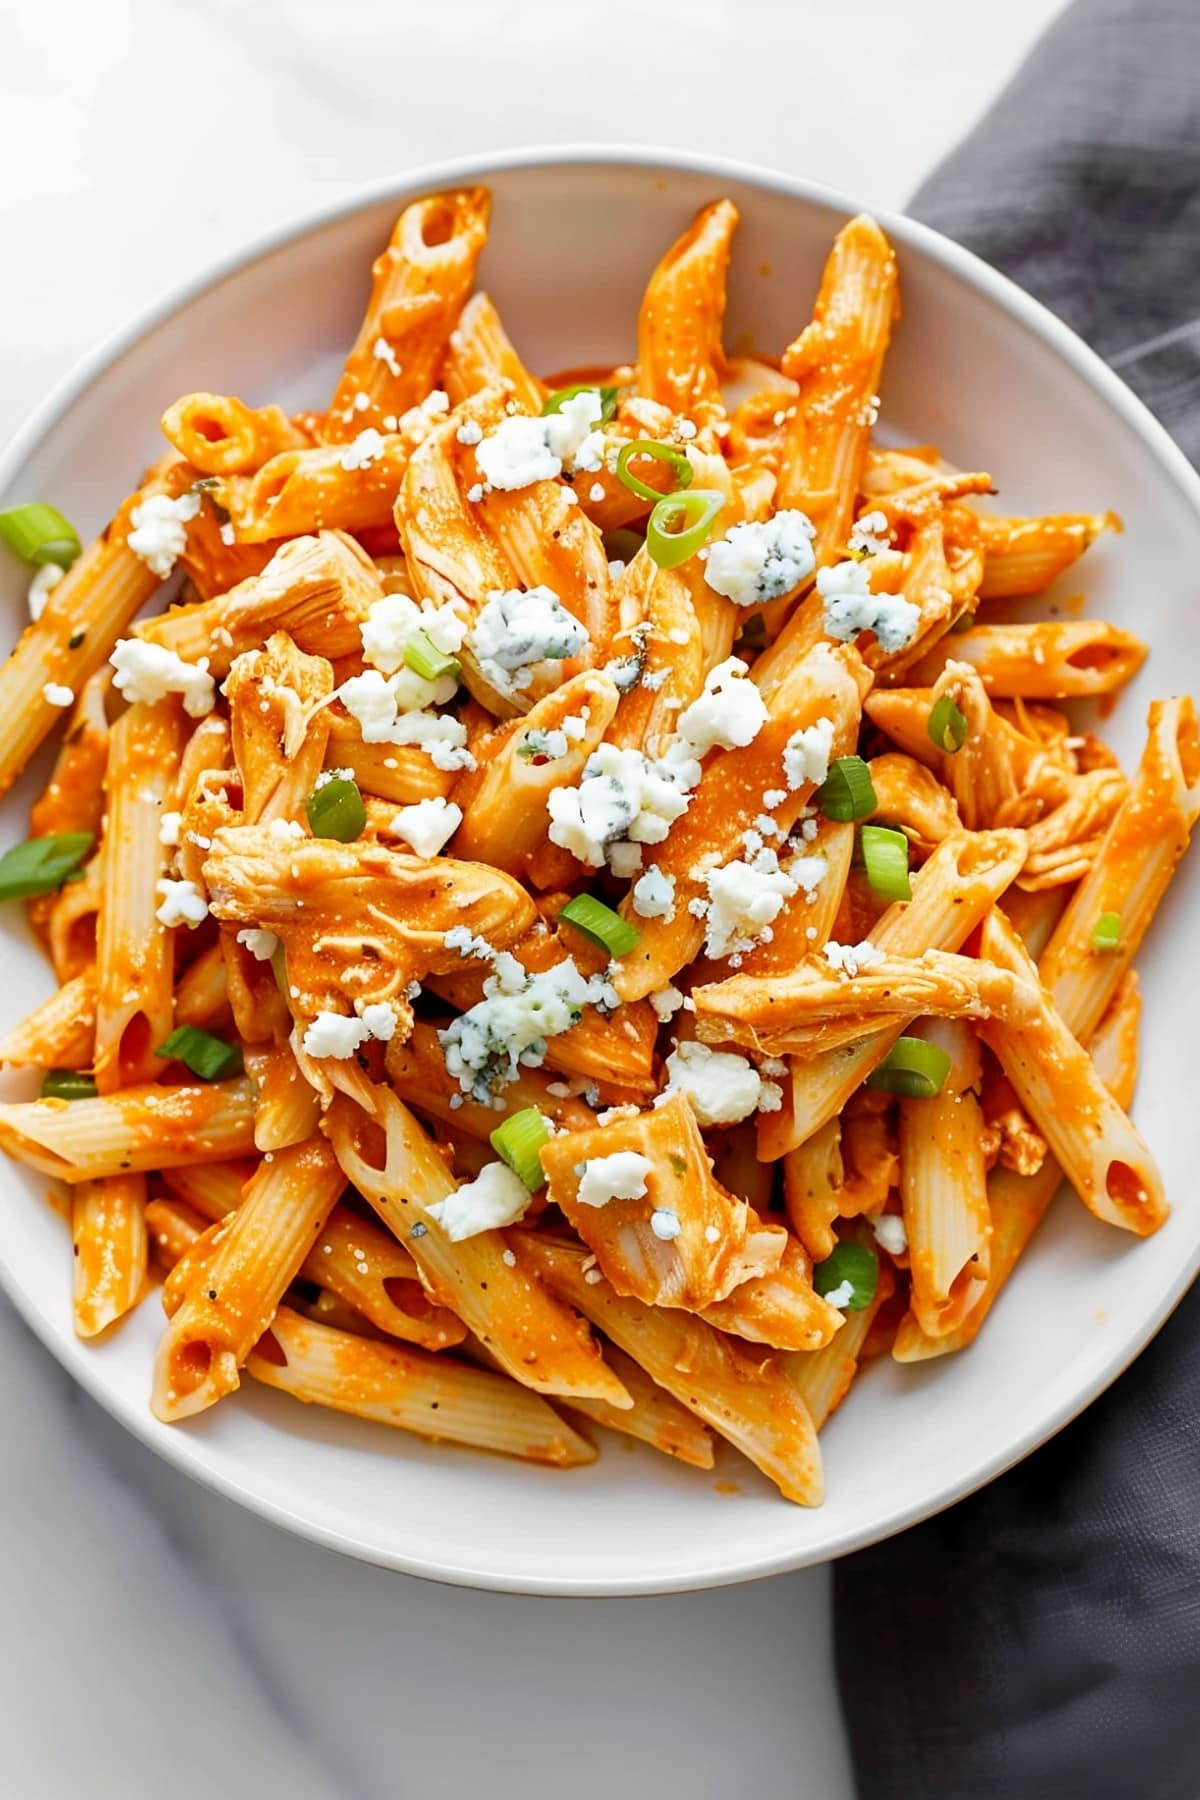 Homemade buffalo chicken pasta, tossed in a creamy sauce and garnished onions and blue cheese